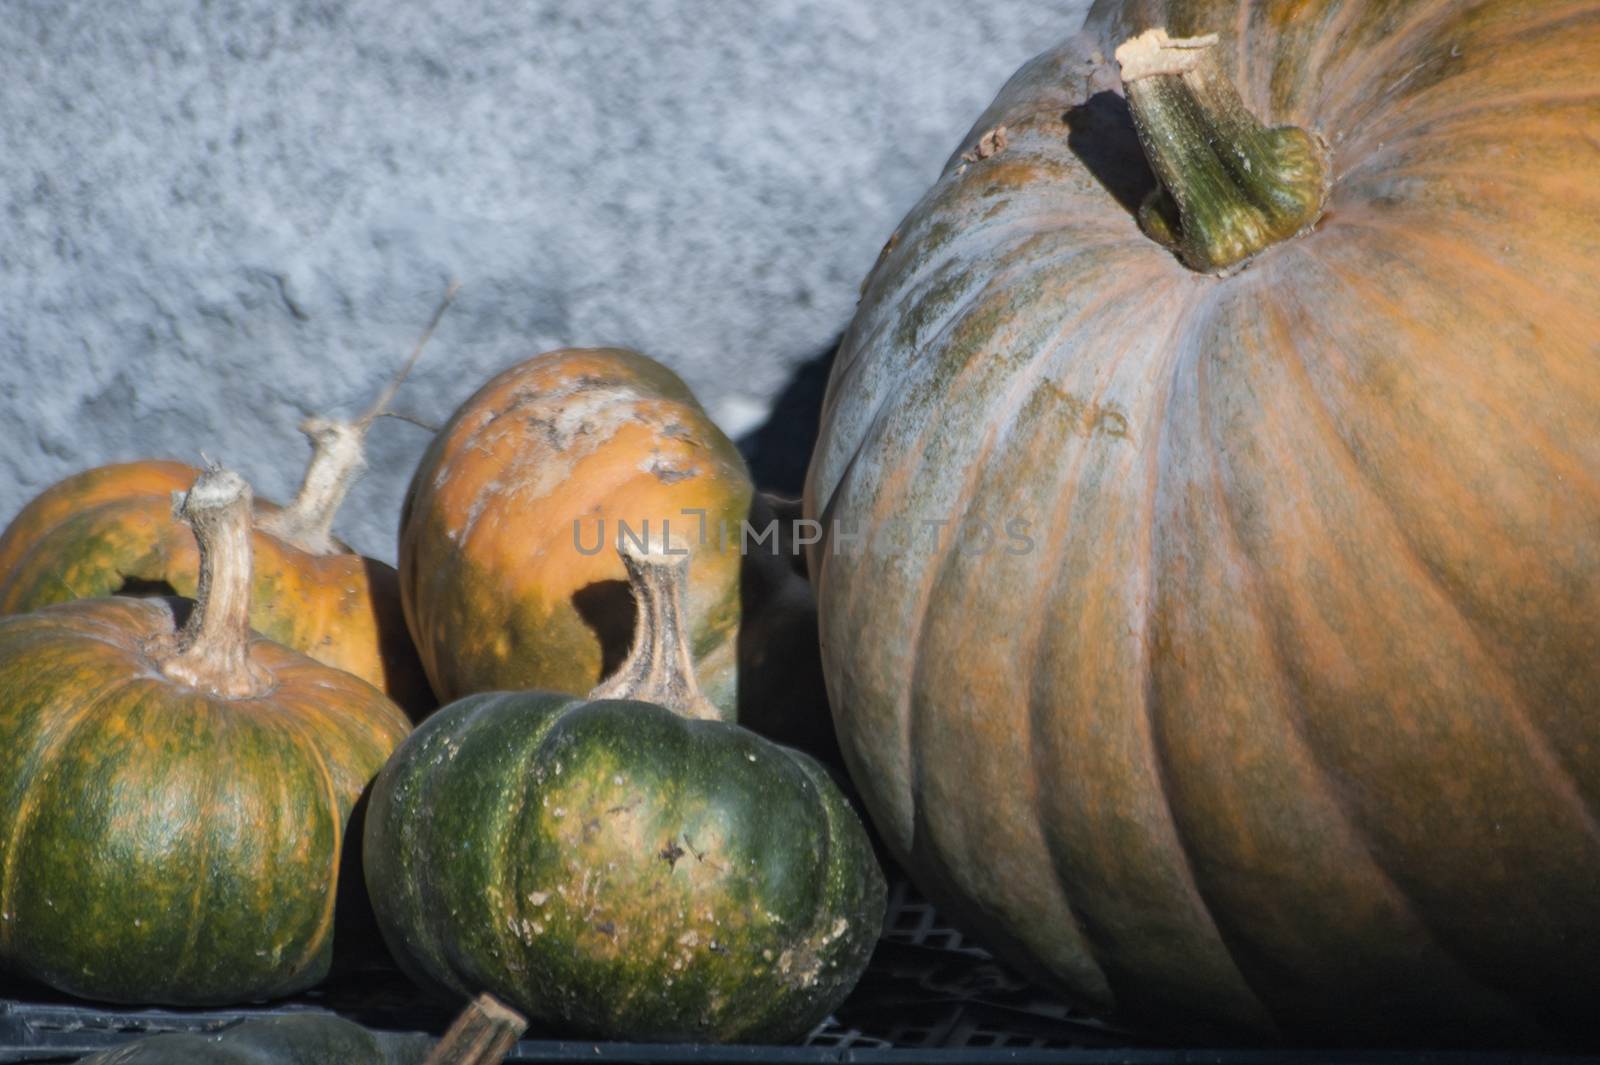 A pumpkins's family waiting for dinner